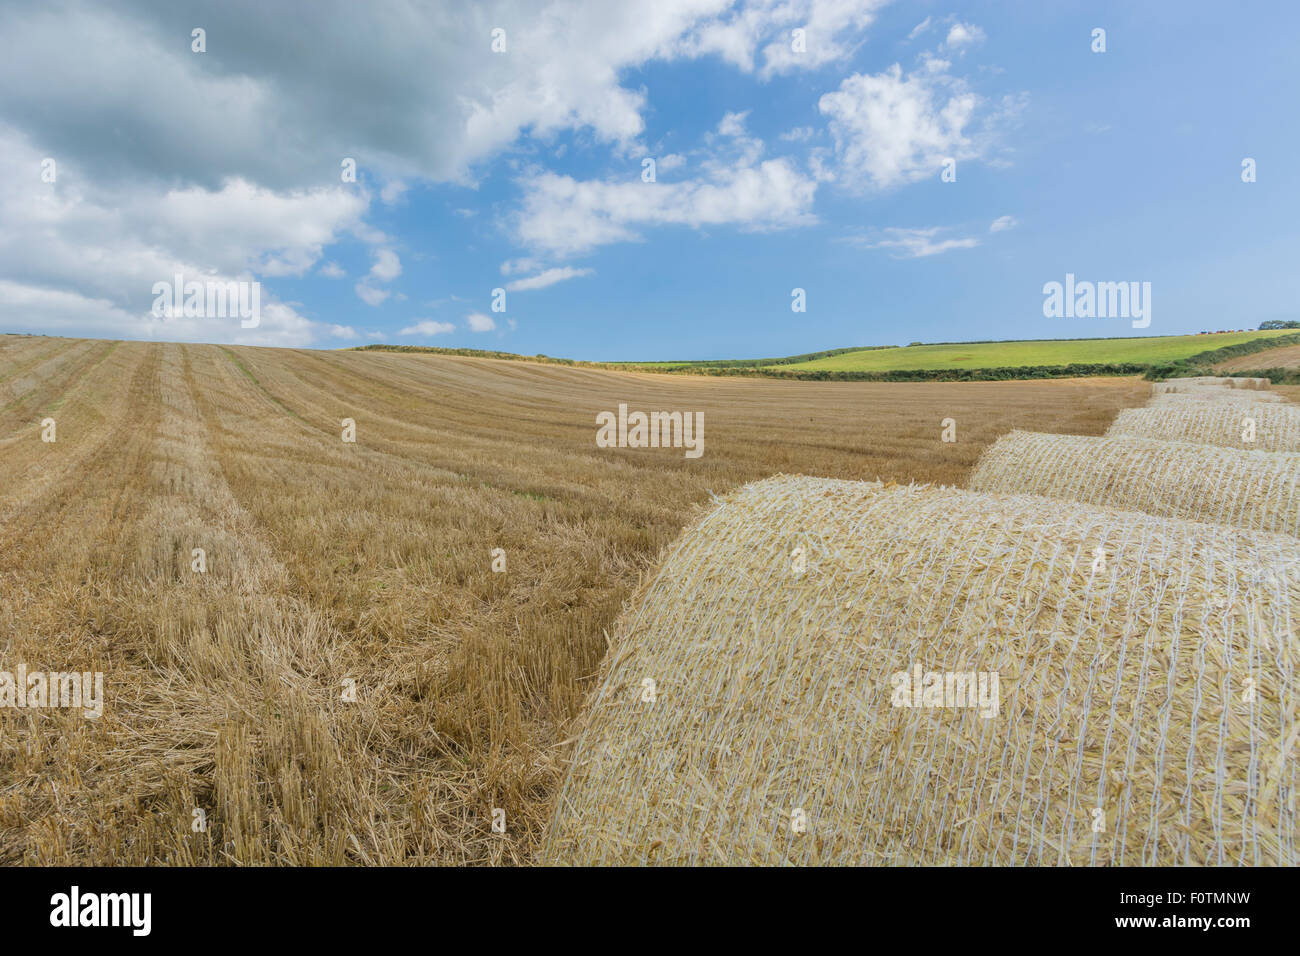 Stubble field after harvested cereal crop. Focus on lower half of image. Metaphor for food security / growing food, farm subsidies. Stock Photo